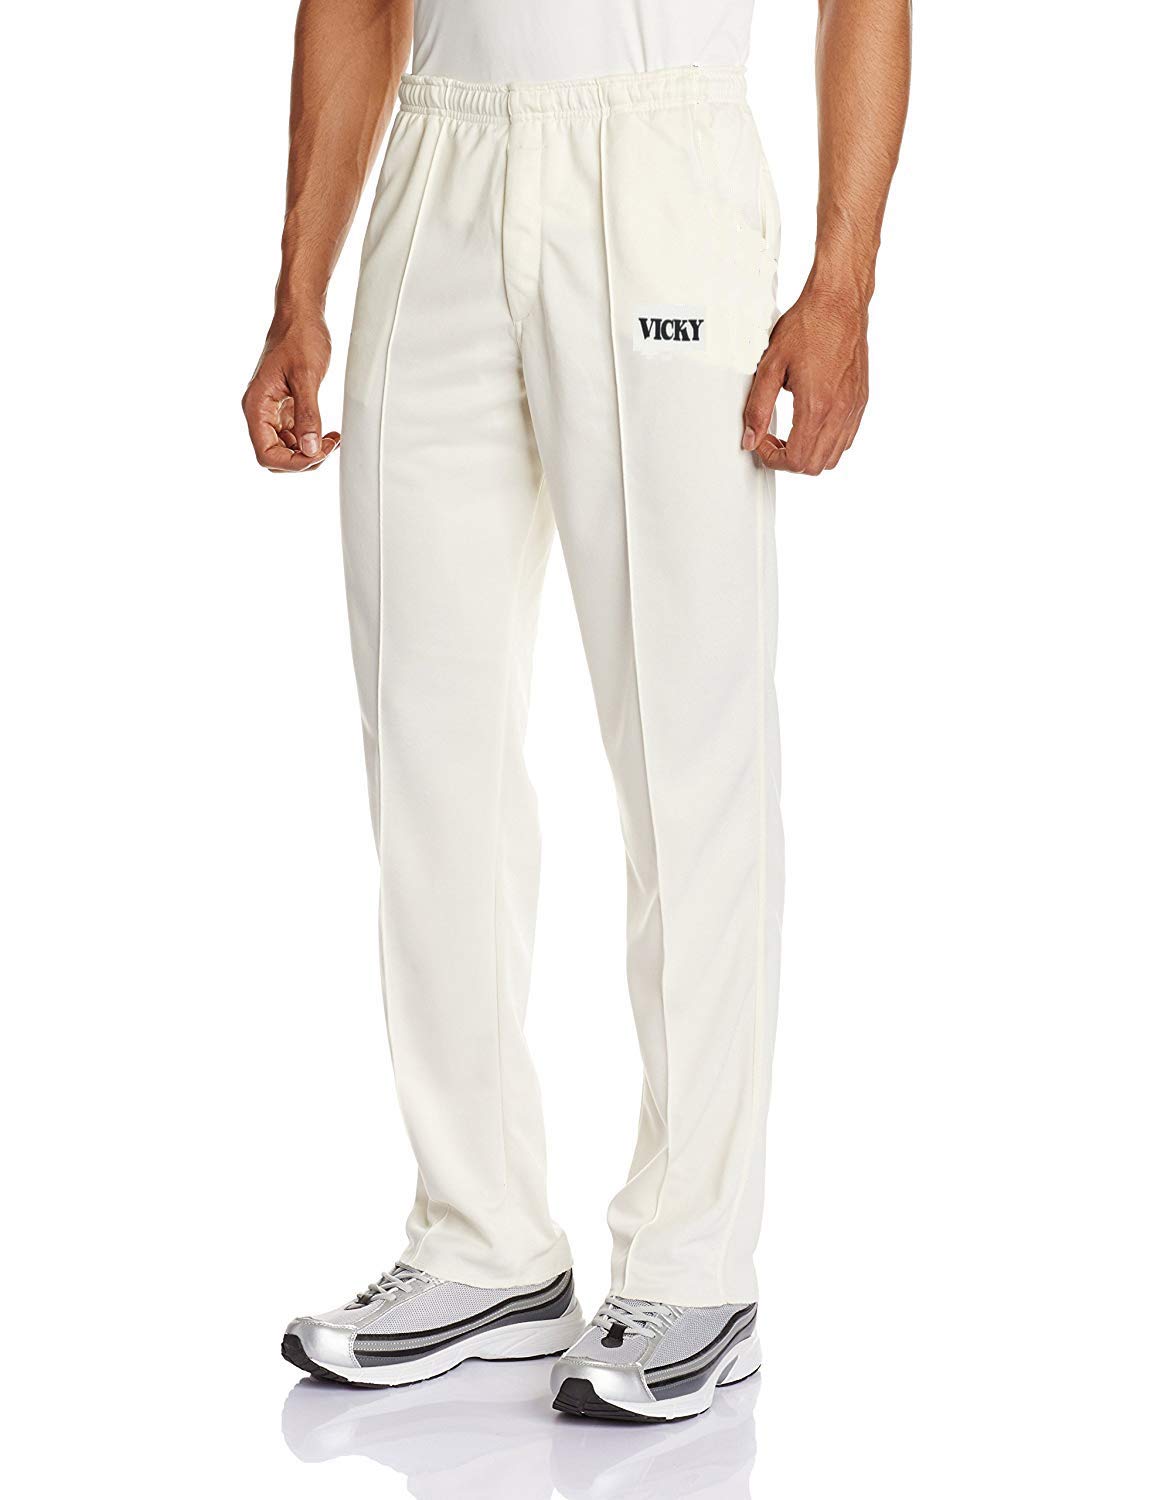 Cricket Trouser Pant White Cool Maxx Fabric by CBB - Cricket Best Buy